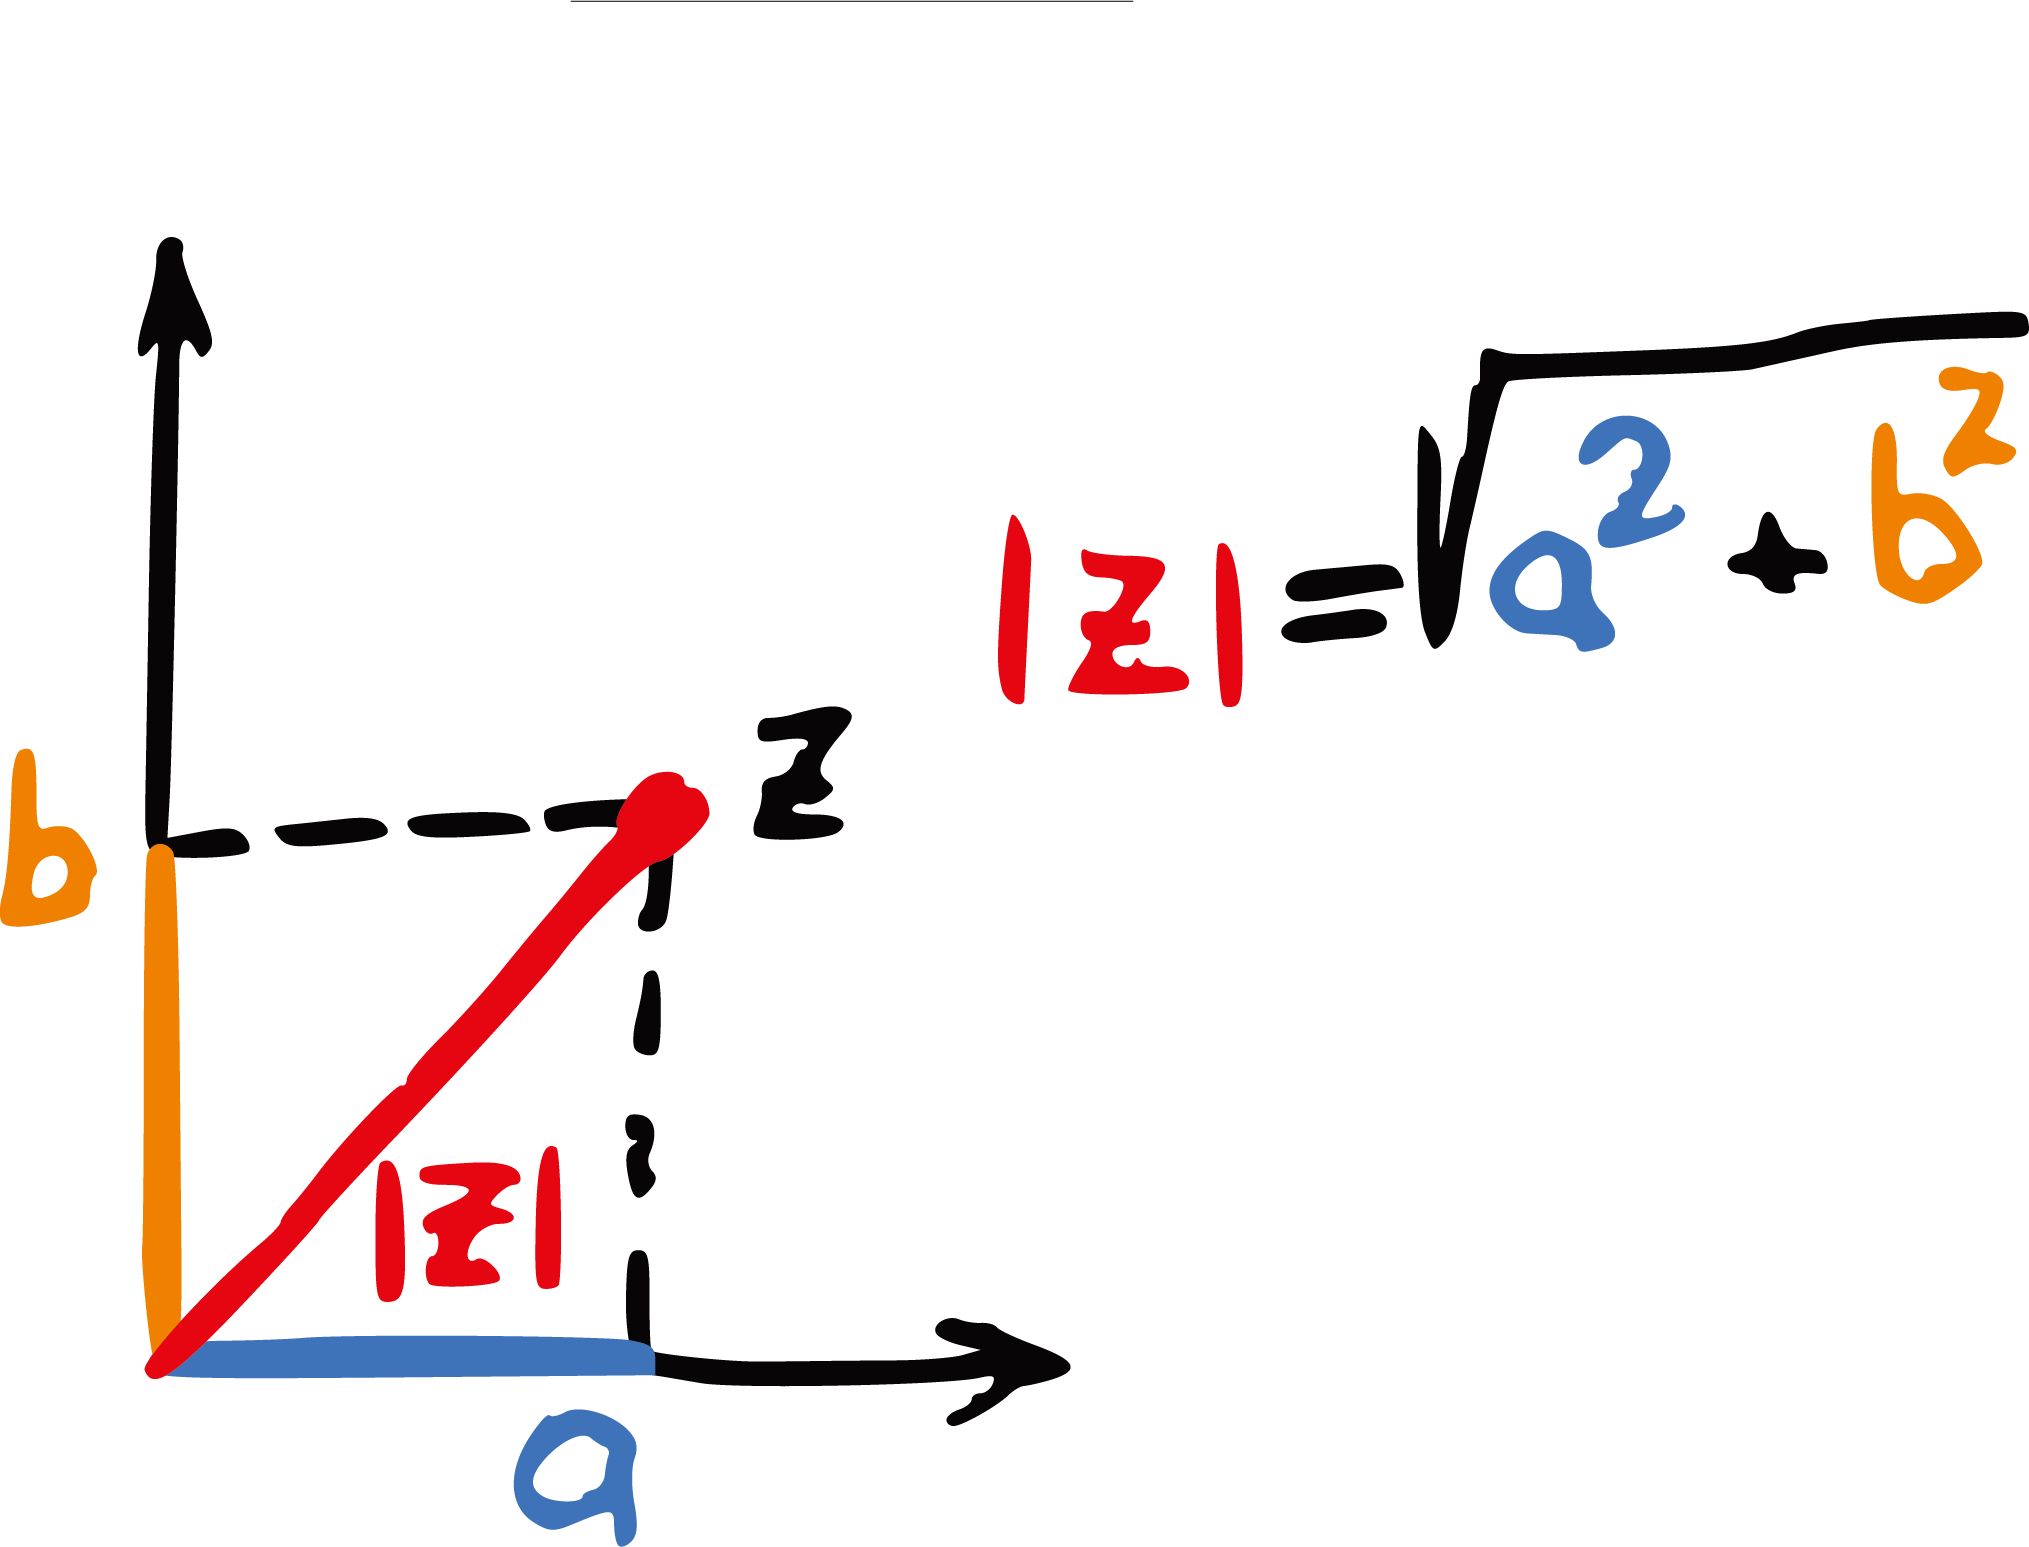 A Black Board With Red And Blue Math Symbols